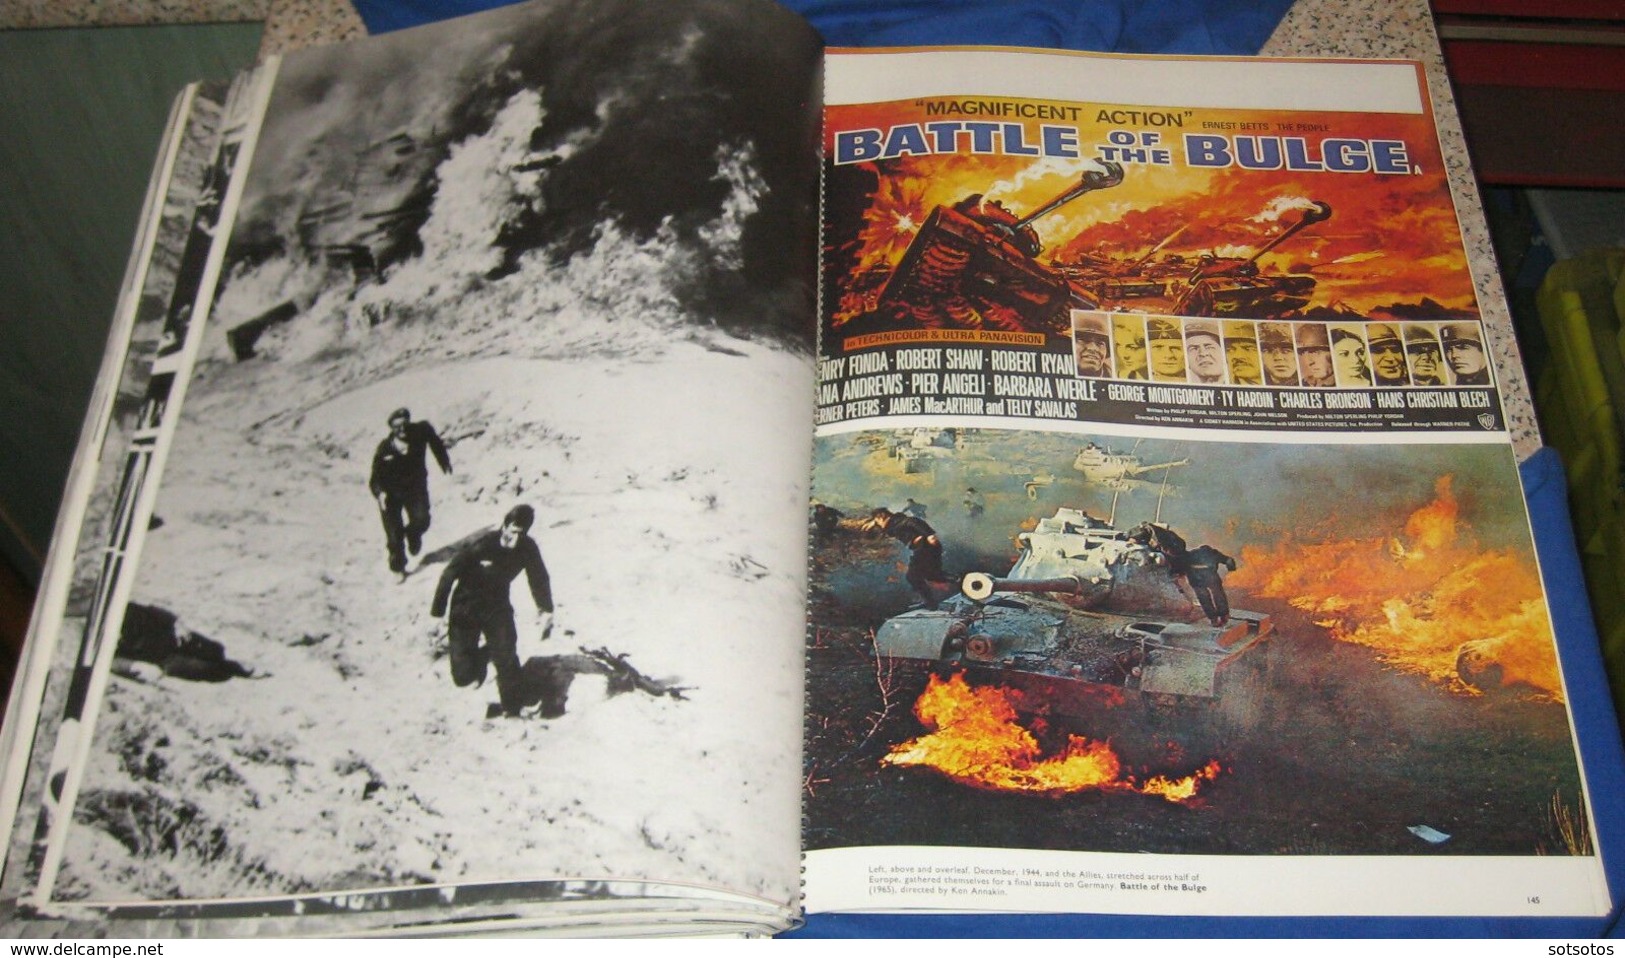 War Movies by Tom Perlmutter Ed. Hamlyn, 1974 - First Edition - Ring bound soft cover book with stiff pictorial card, fi